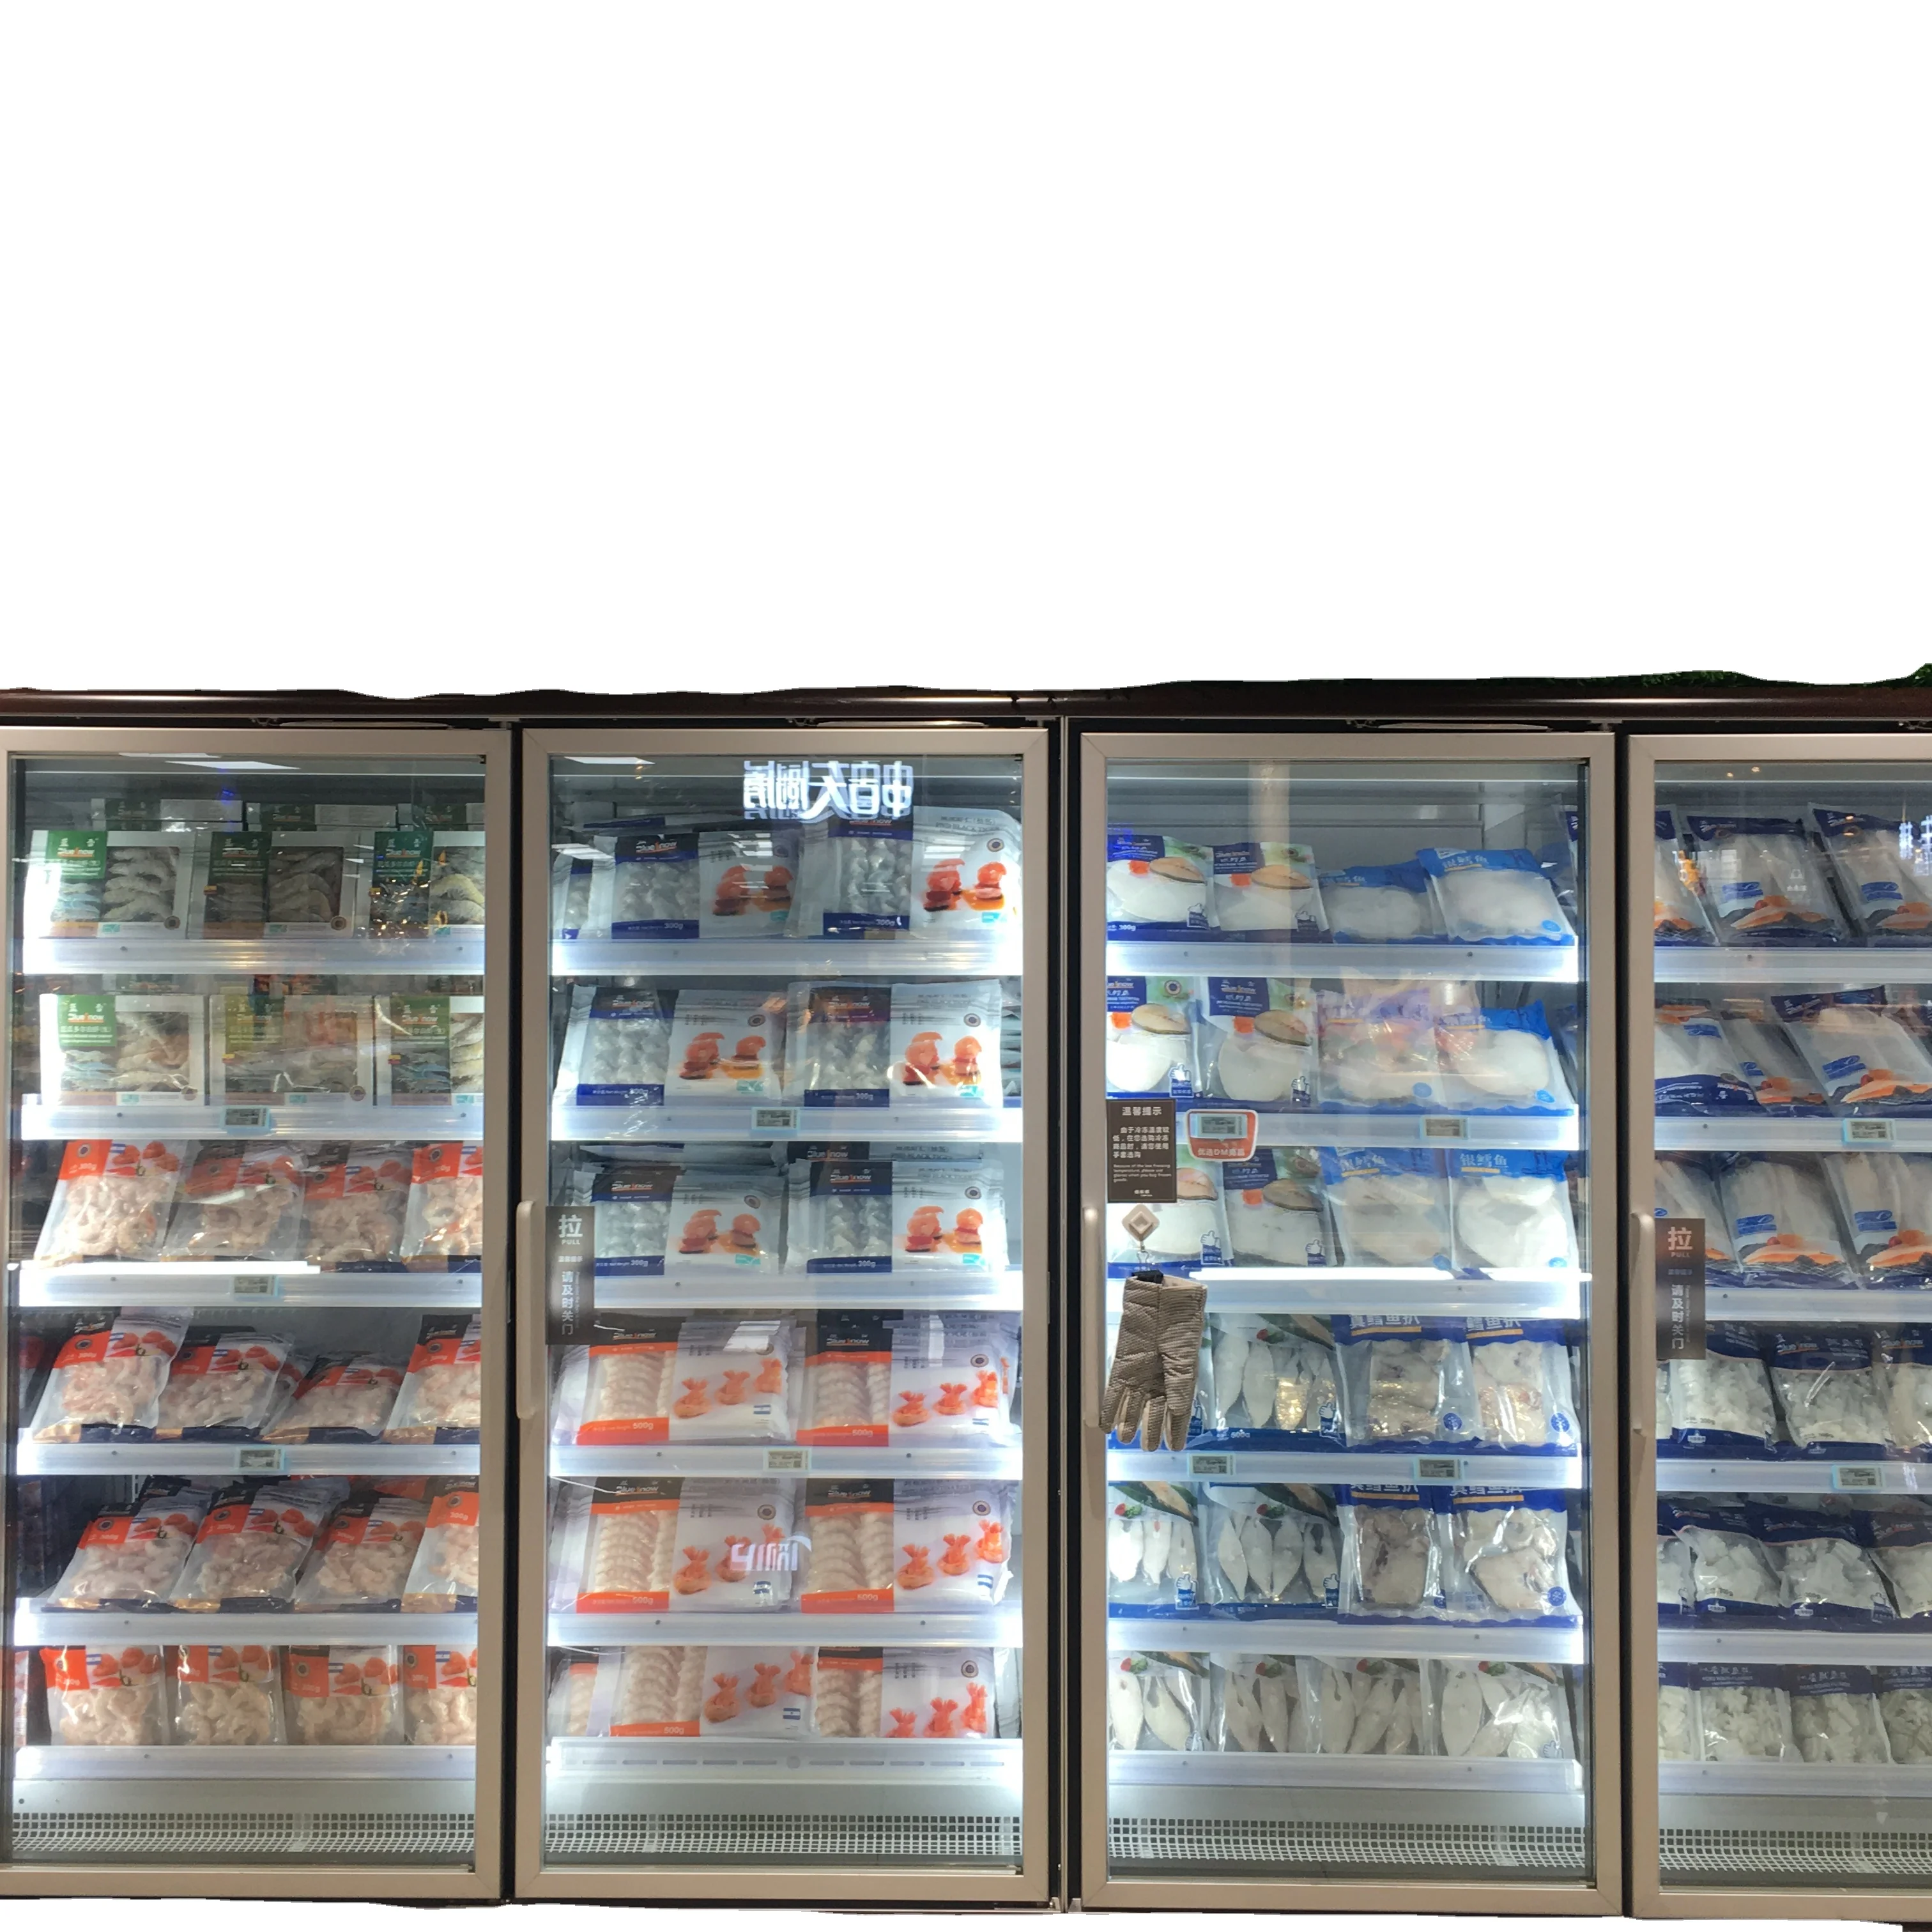 

Commercial walk in cooler with glass door and shelving large display area